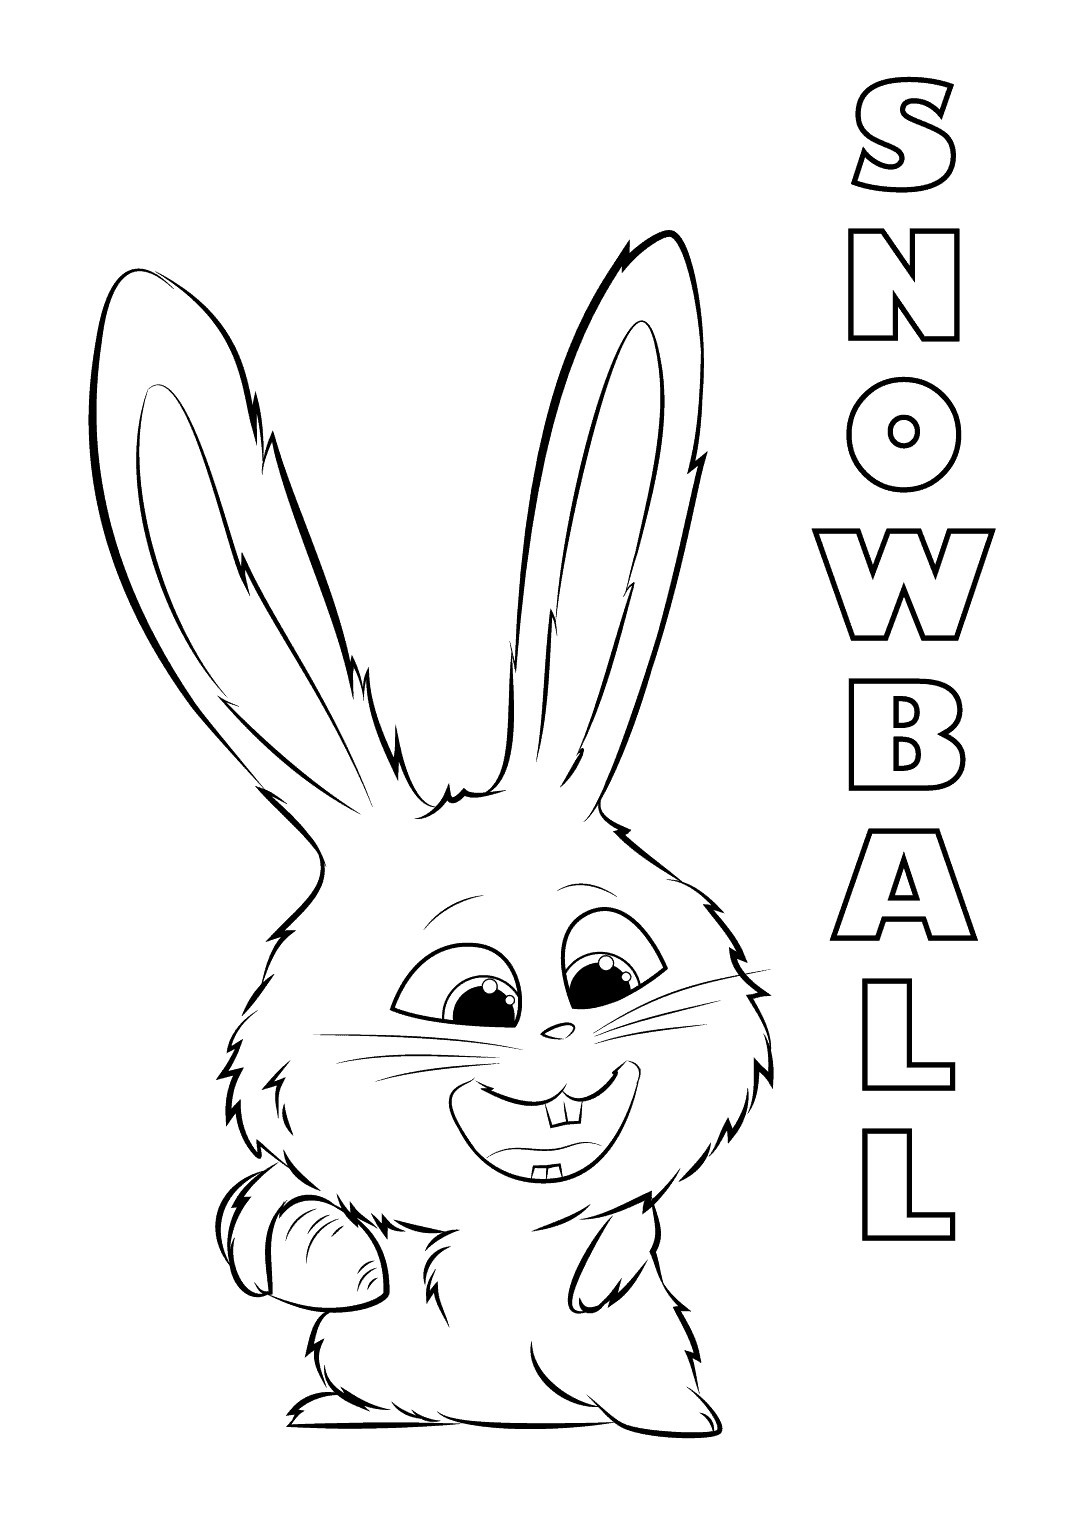 Snowball Coloring Page - Free Printable Coloring Pages for Kids